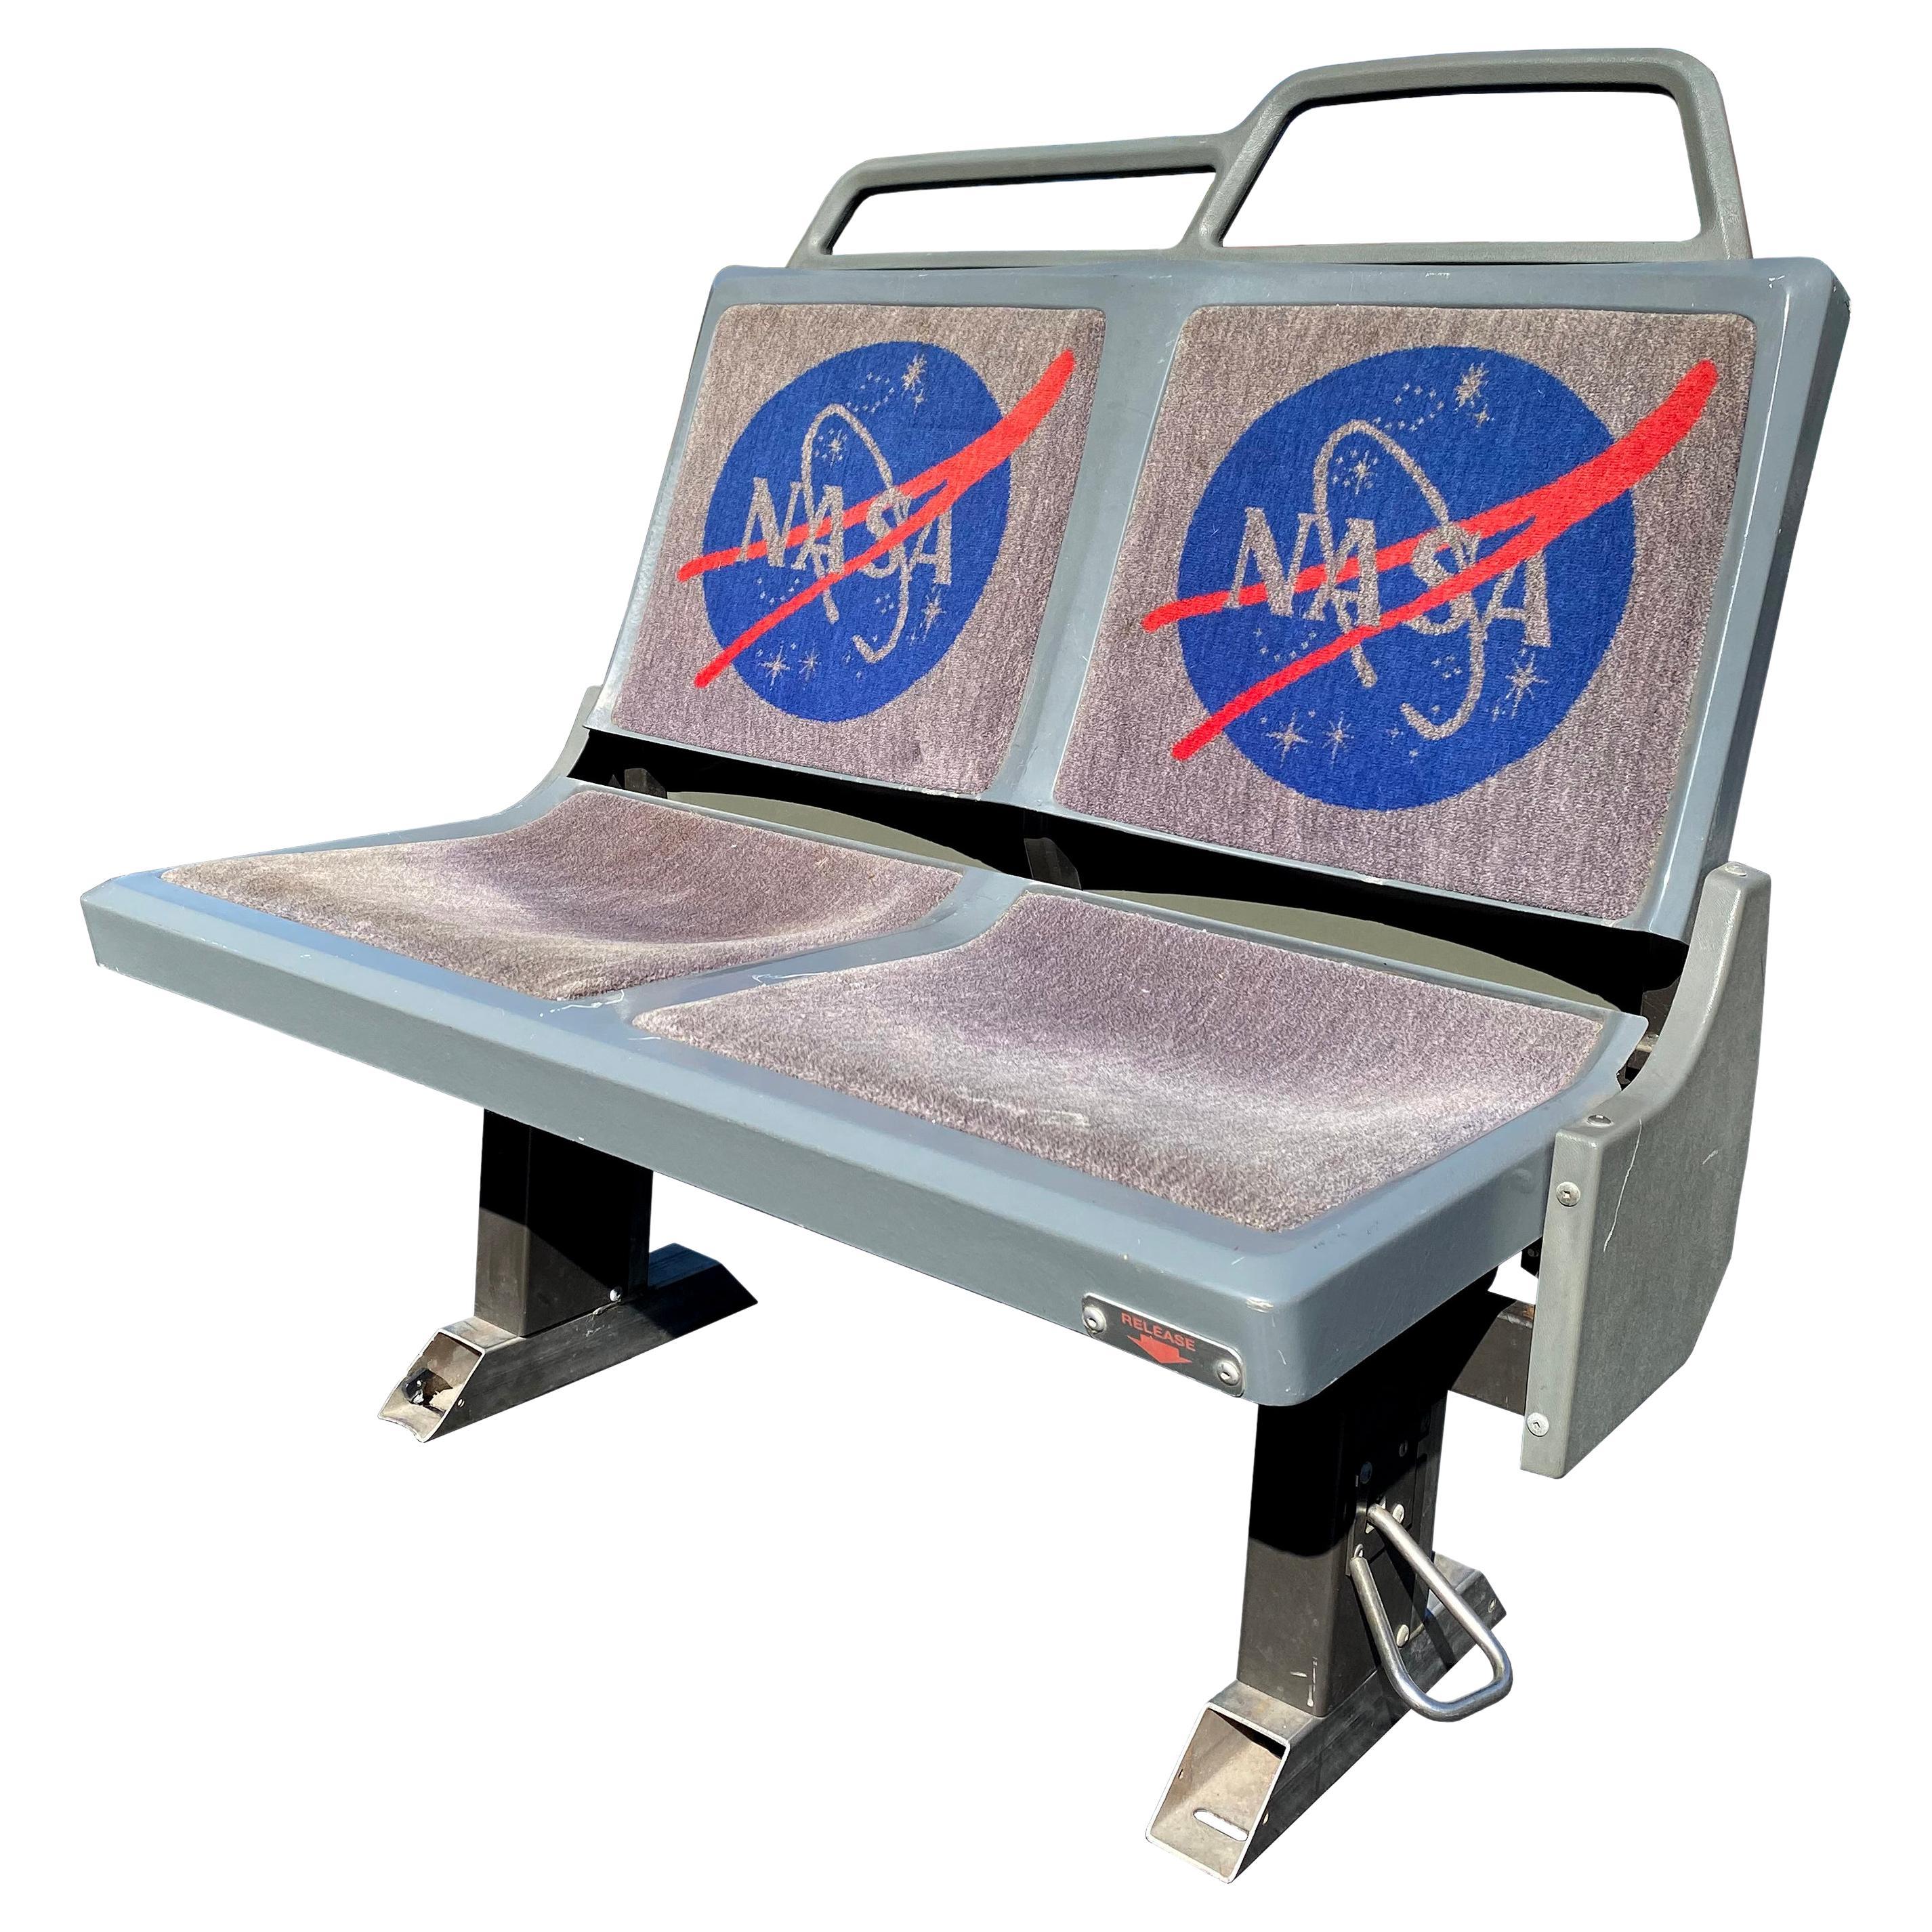 Kennedy Space Center Nasa Shuttle Seats For Sale